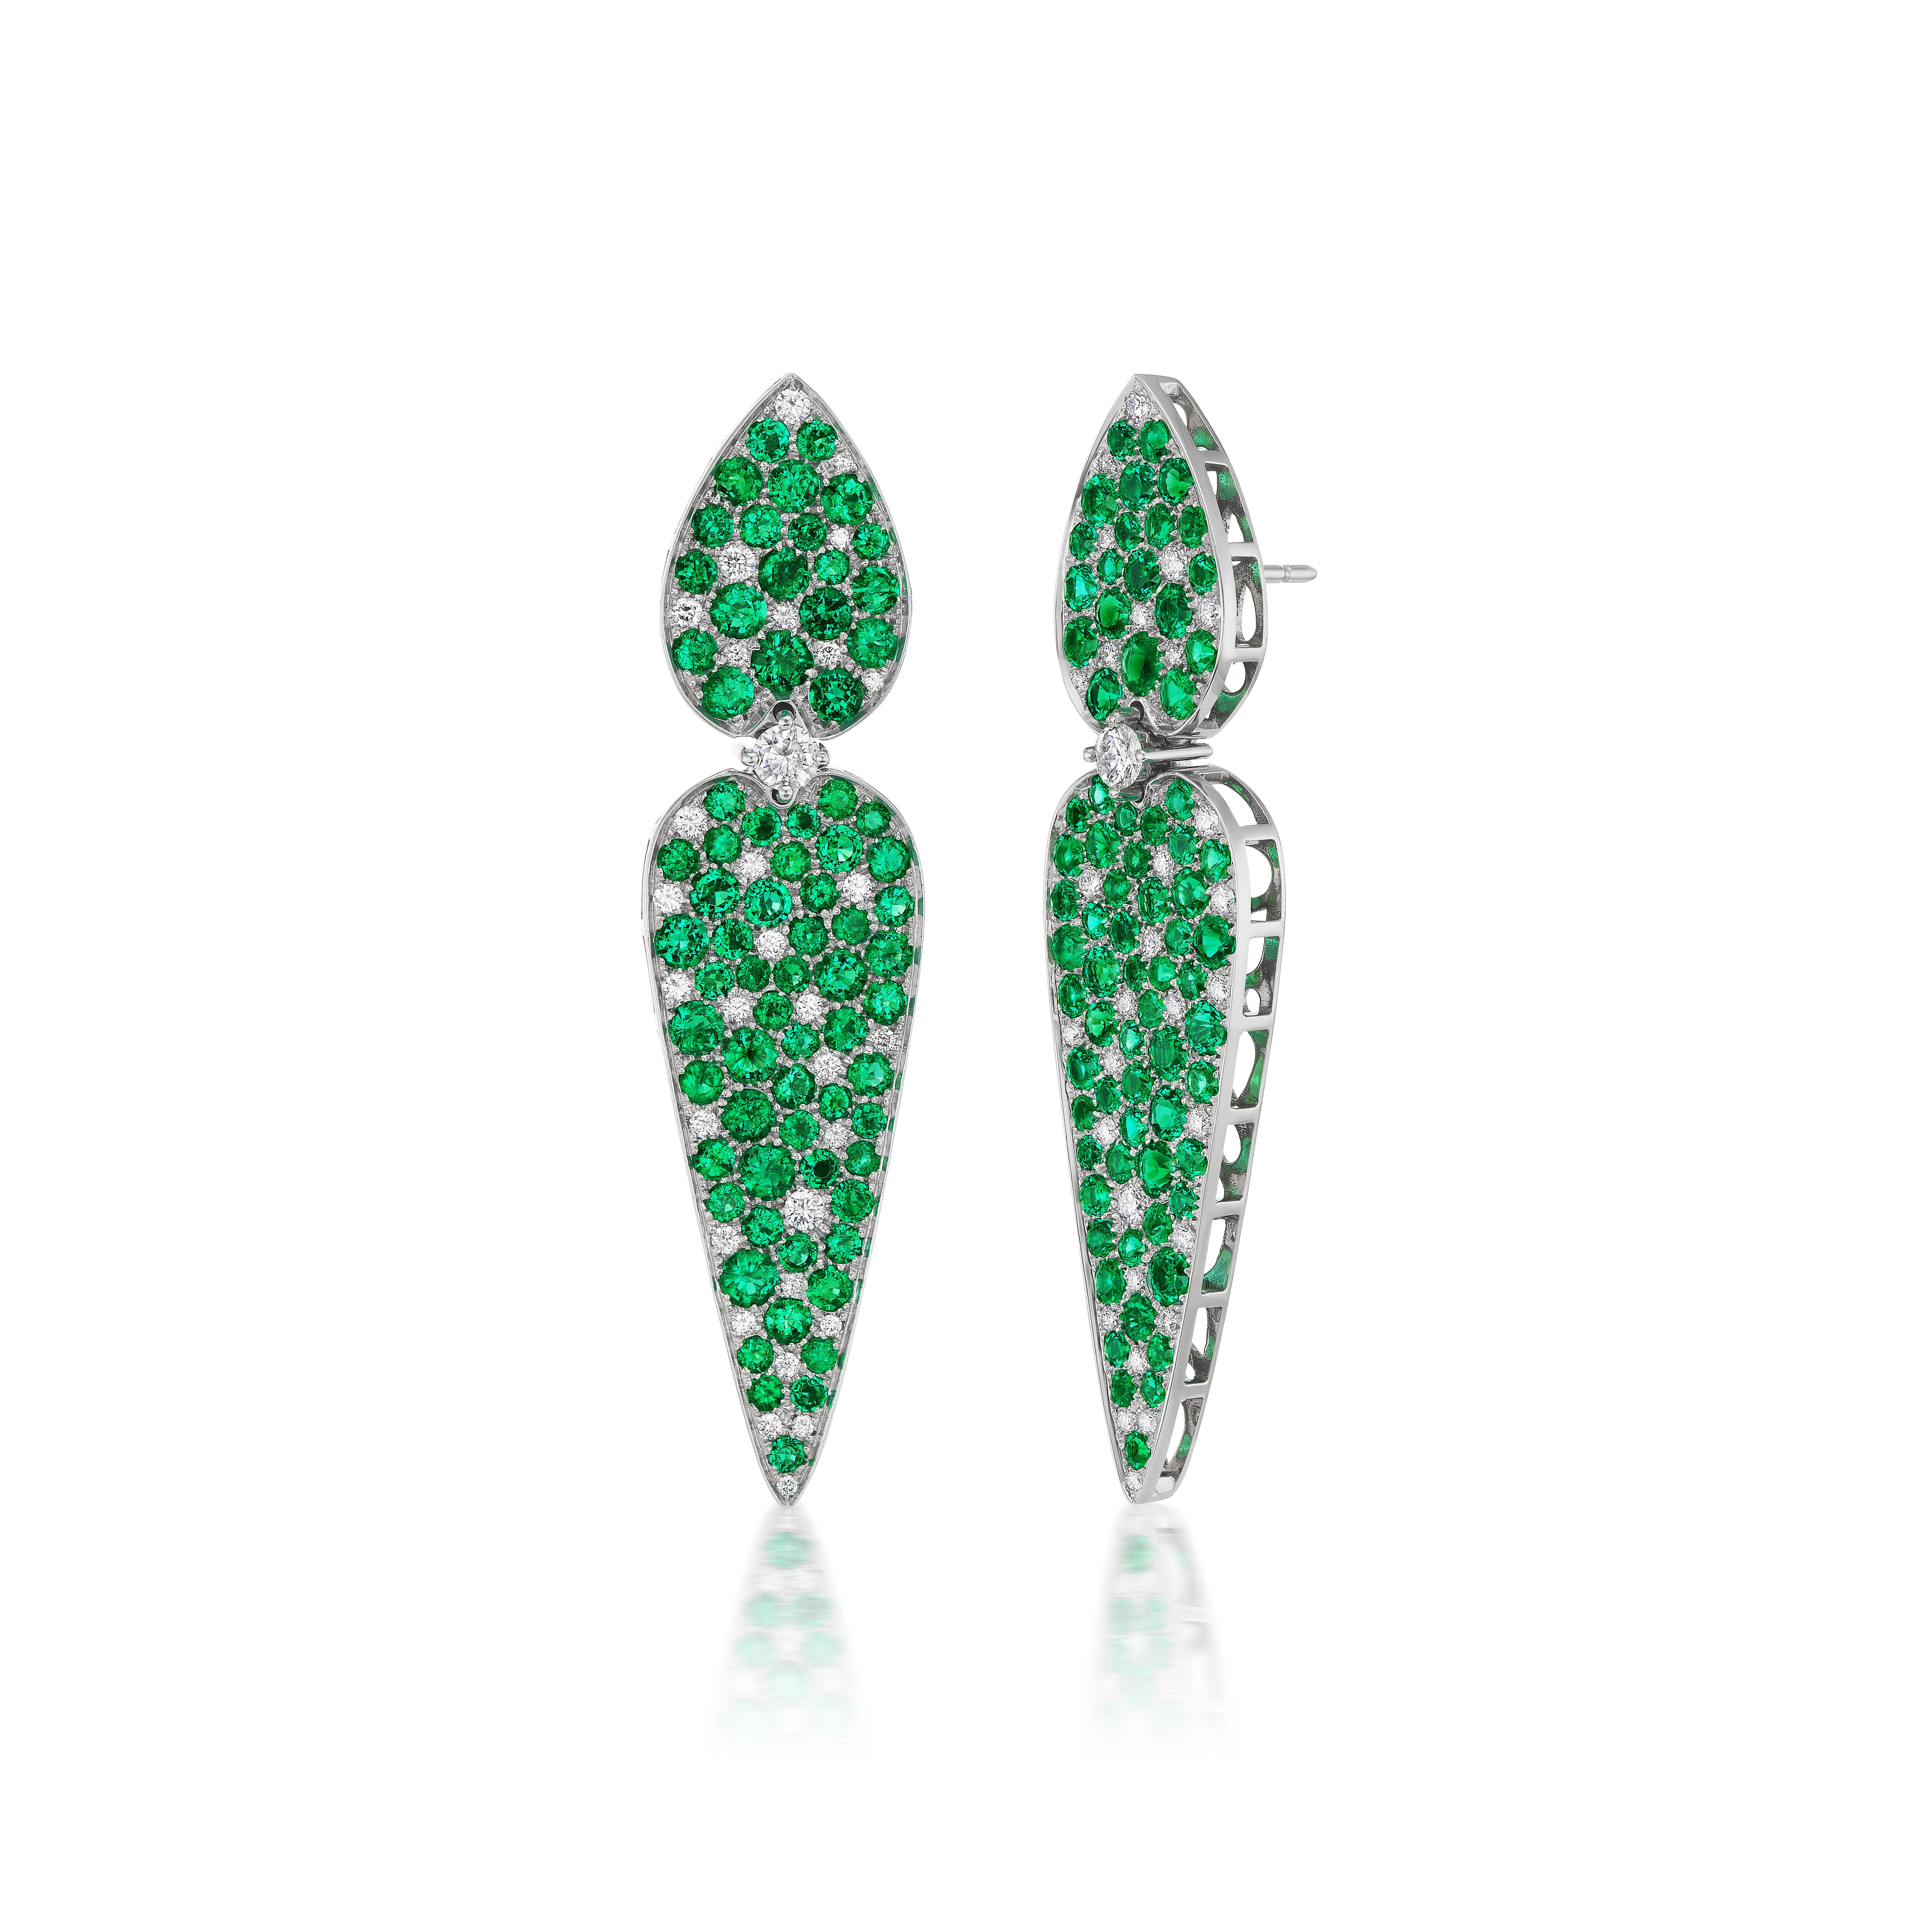 The finest Colombian emeralds are mounted in titanium and highlighted with diamonds in these striking earrings.  The emeralds speak for themselves and this gem quality nearly glows, even at night.  The mounting will make you glow, with joy, as they